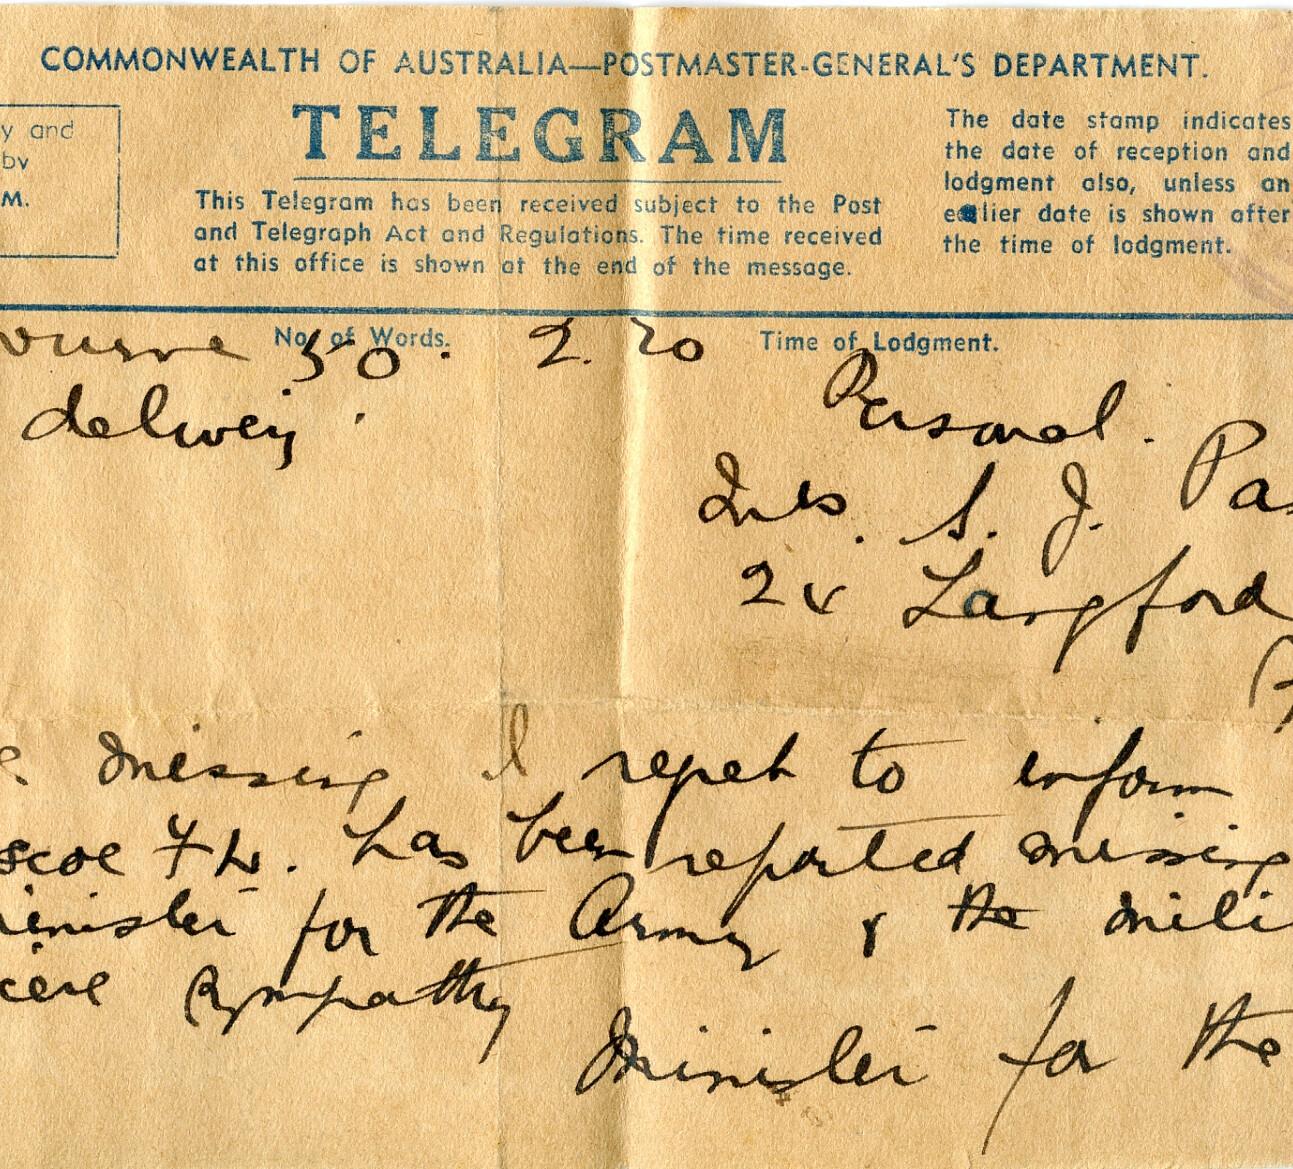 The telegram informing Pascoe's family of his disappearance